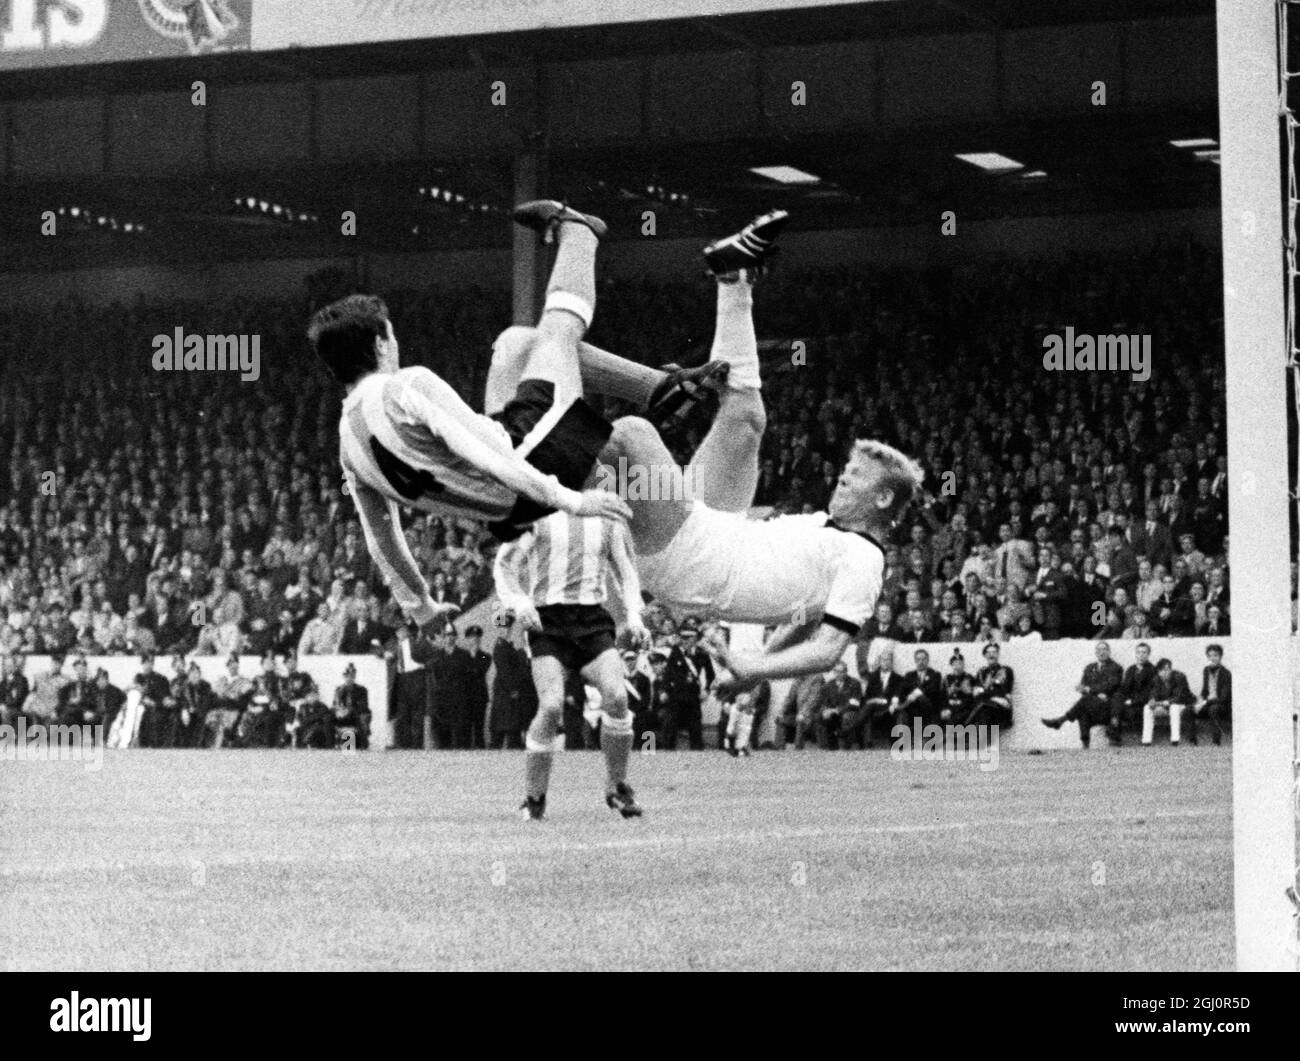 Now, the Tandem Kick 1966 World Cup Football One bicycle kick correctly executed makes the crowd gasp, two leaves them breathless. At Villa Park, Birmingham, the two in tandem are Argentina's Roberto Perfumo (on left) and West Germany's Helmut Haller. They were playing in Saturday's World Cup match, which ended in a goalless draw. 17 July 1966 Stock Photo